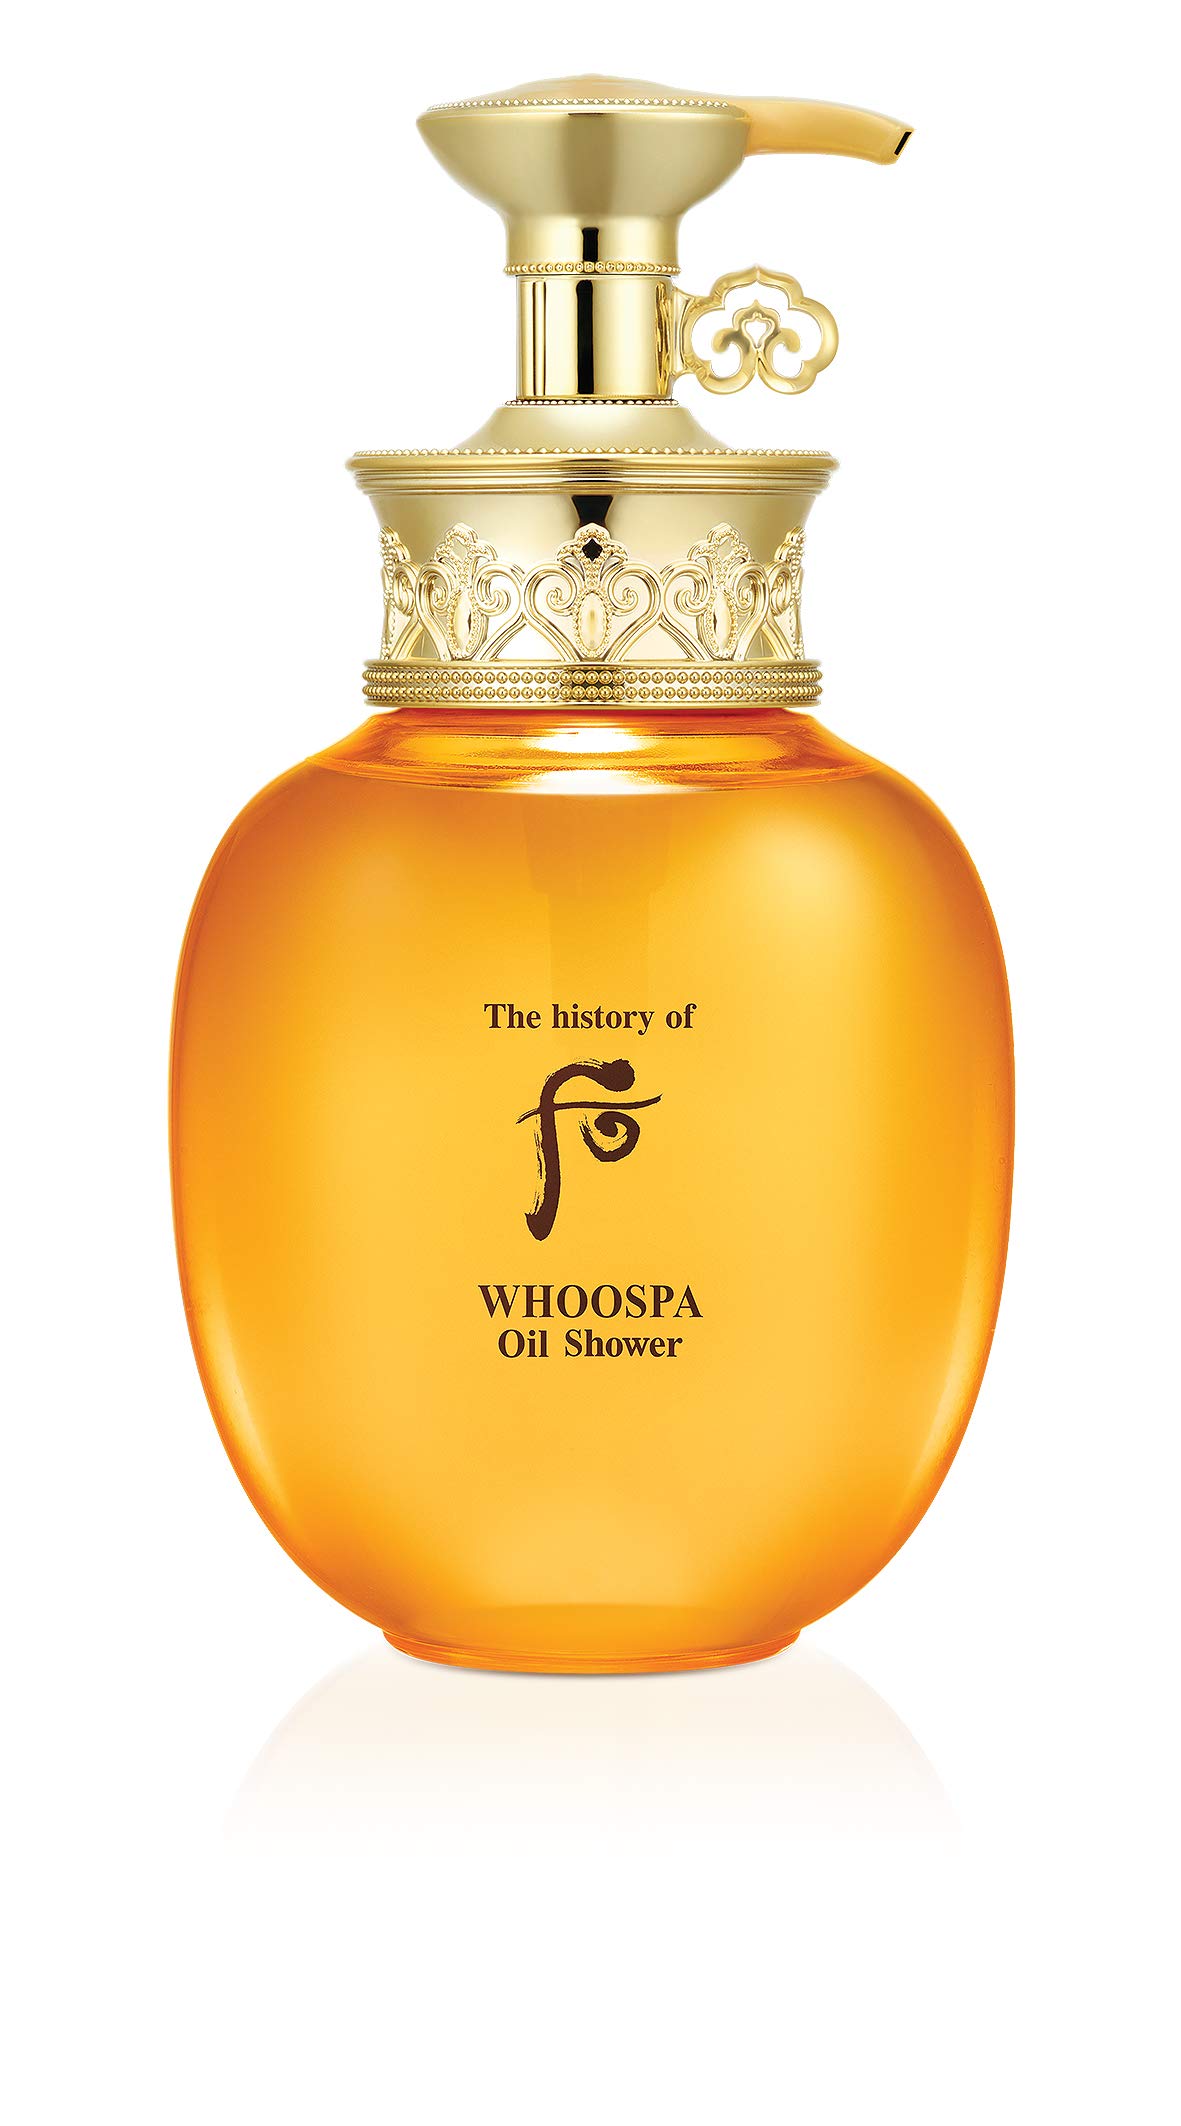 The History of Whoo Spa Oil Shower | Premium Herbal Body Cleanser for Gentle & Instant Skin Impurities Removal | Moisturizing Finish, Low-irritation, Aruvedic Fragrance, 200ml